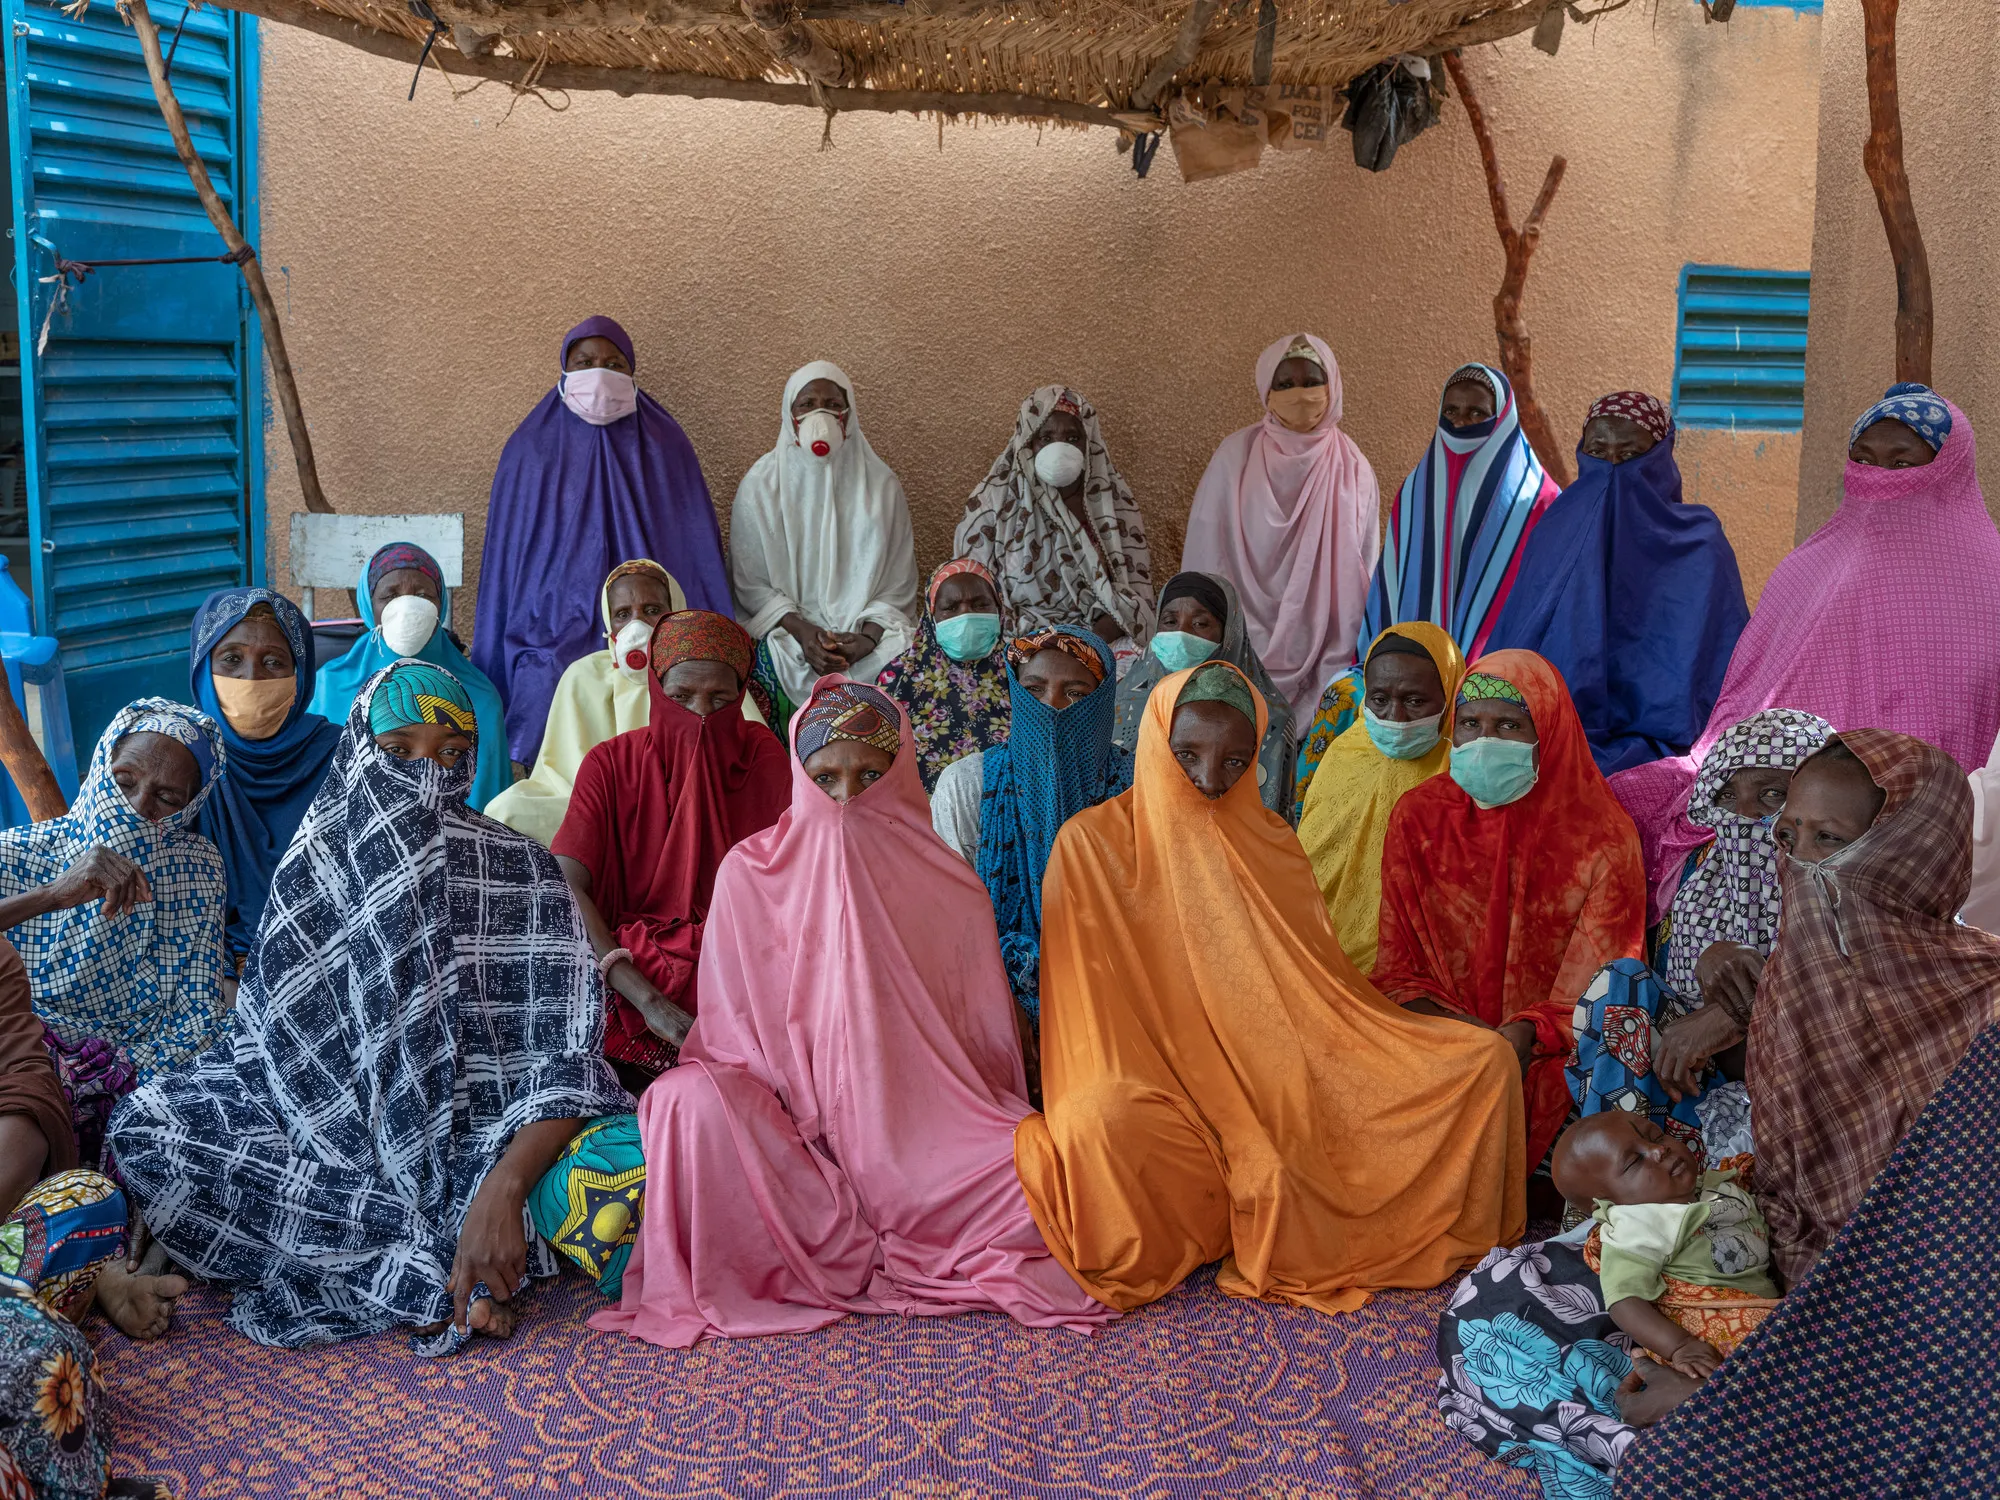 A group of women in colorful robes and face masks pose in rows facing forward.